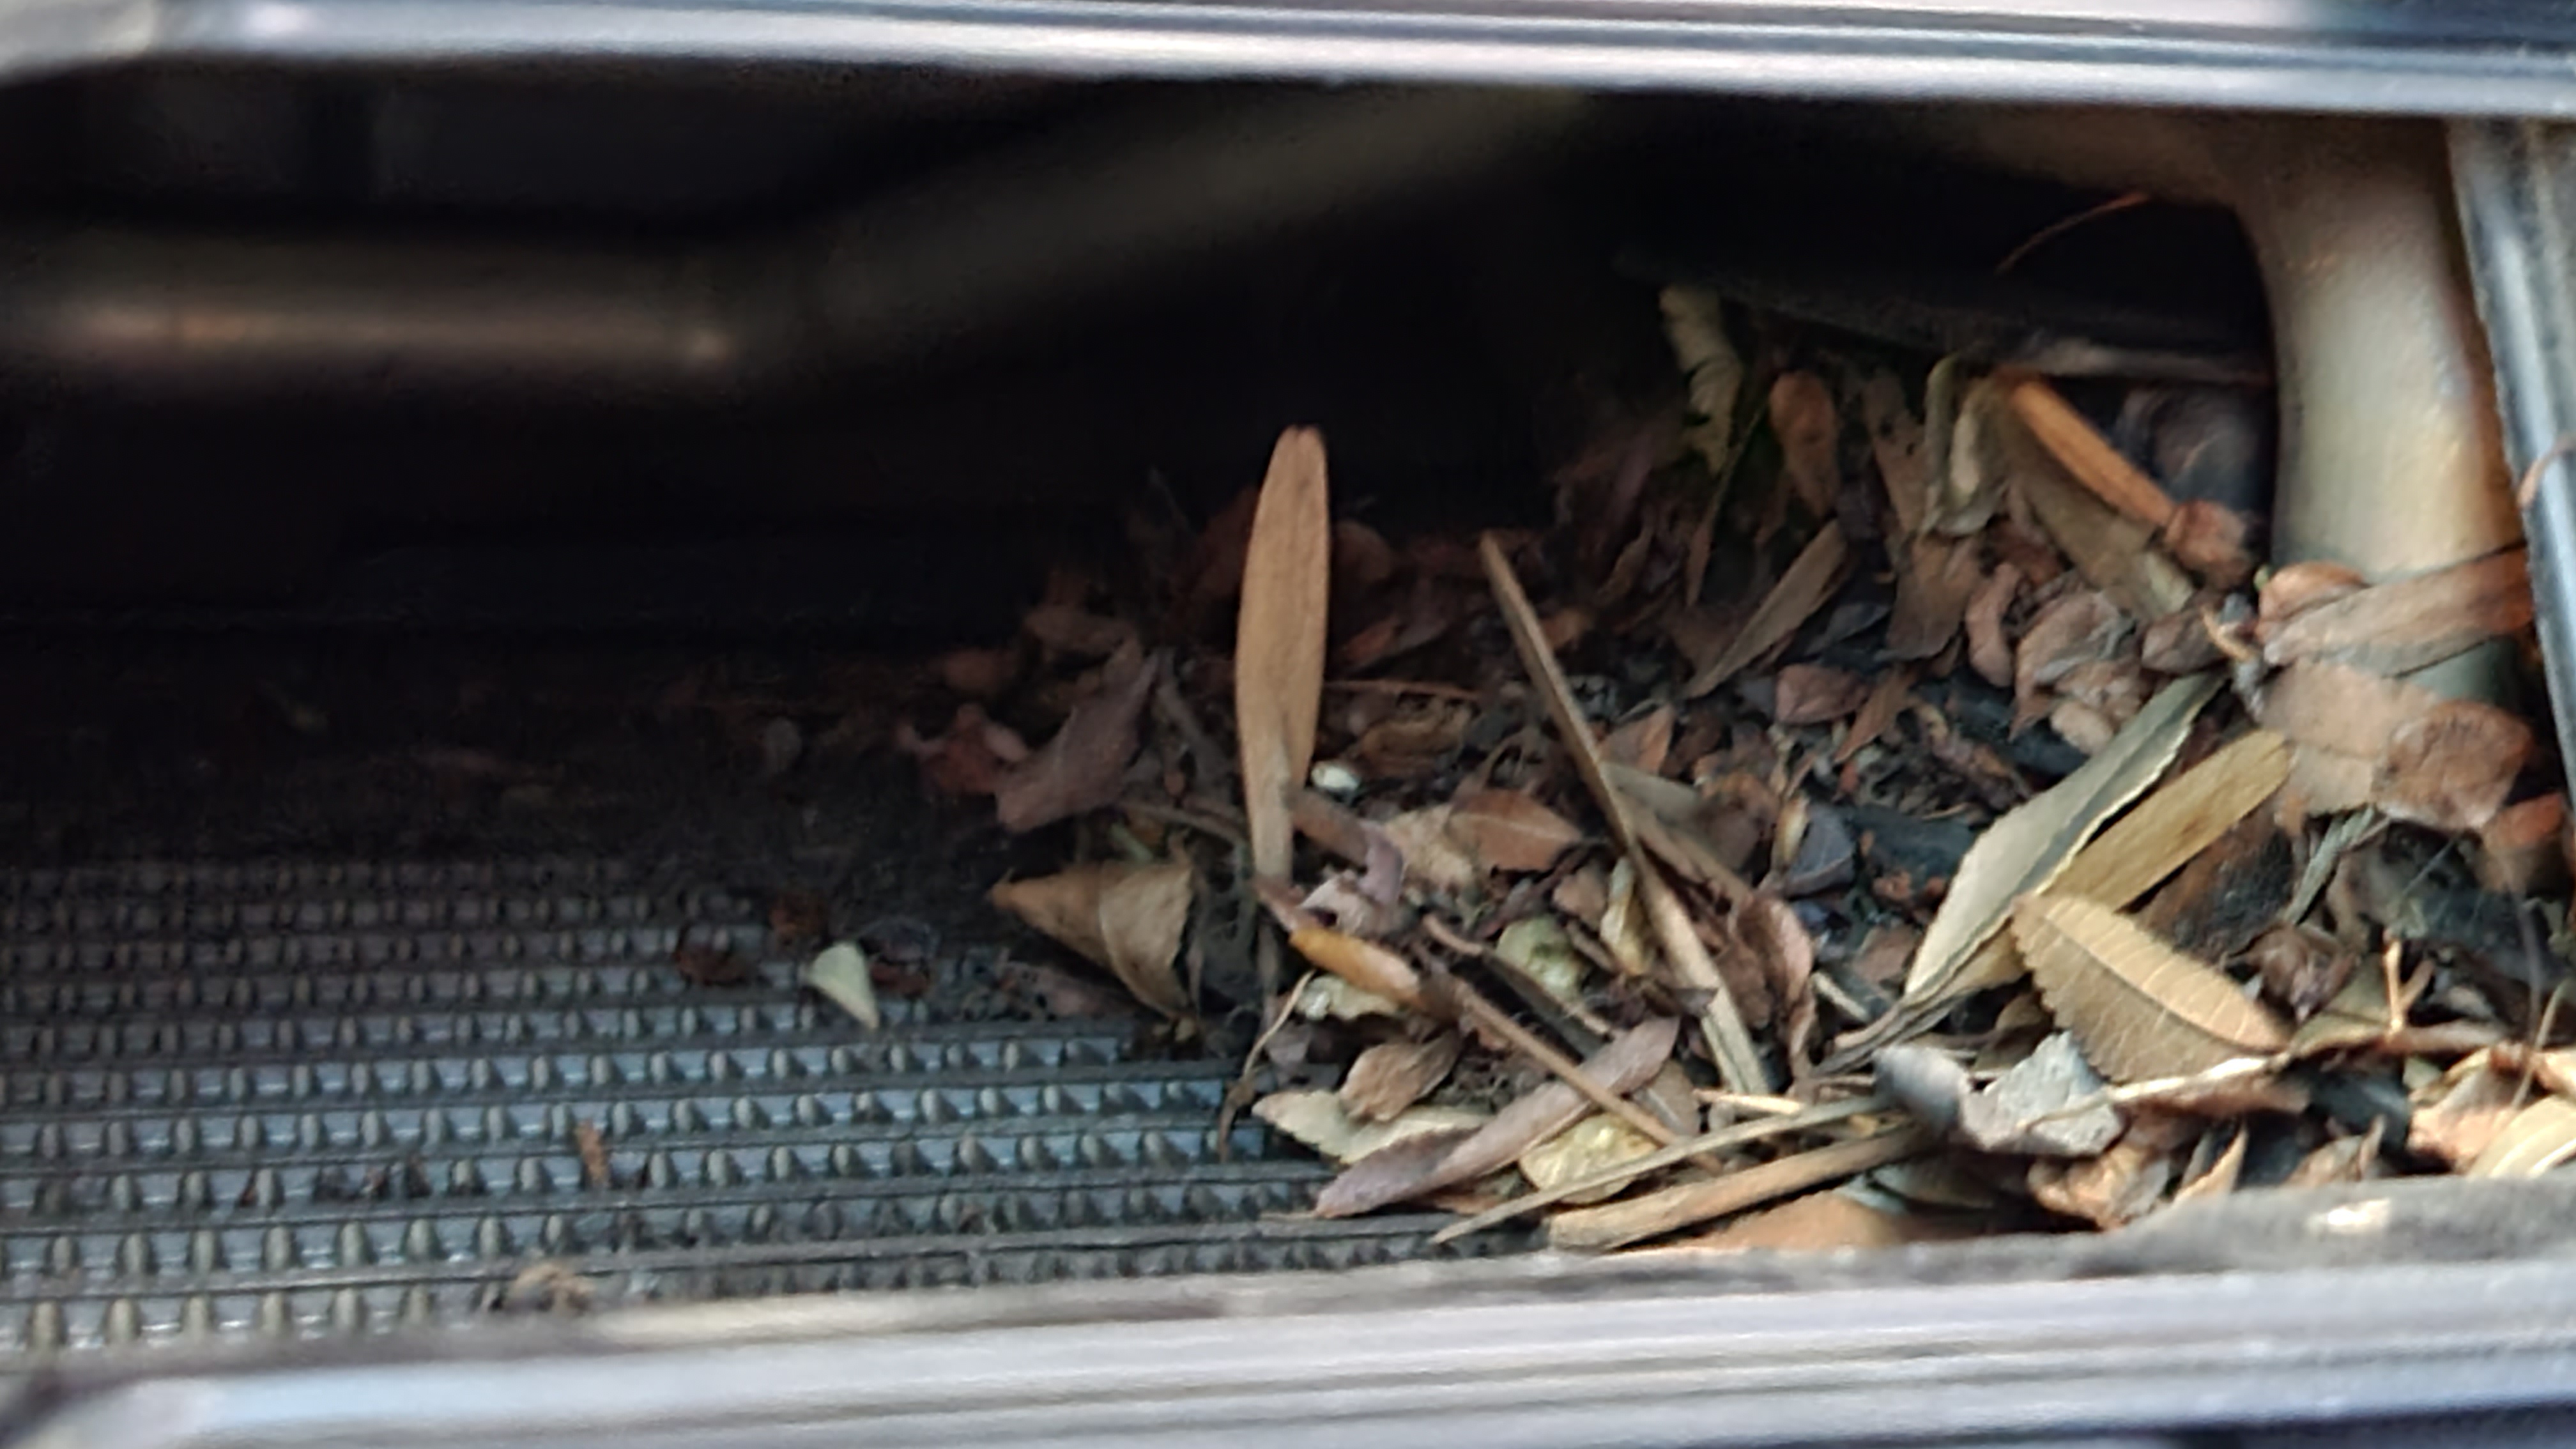 When was the last time you changed your cabin air filter?